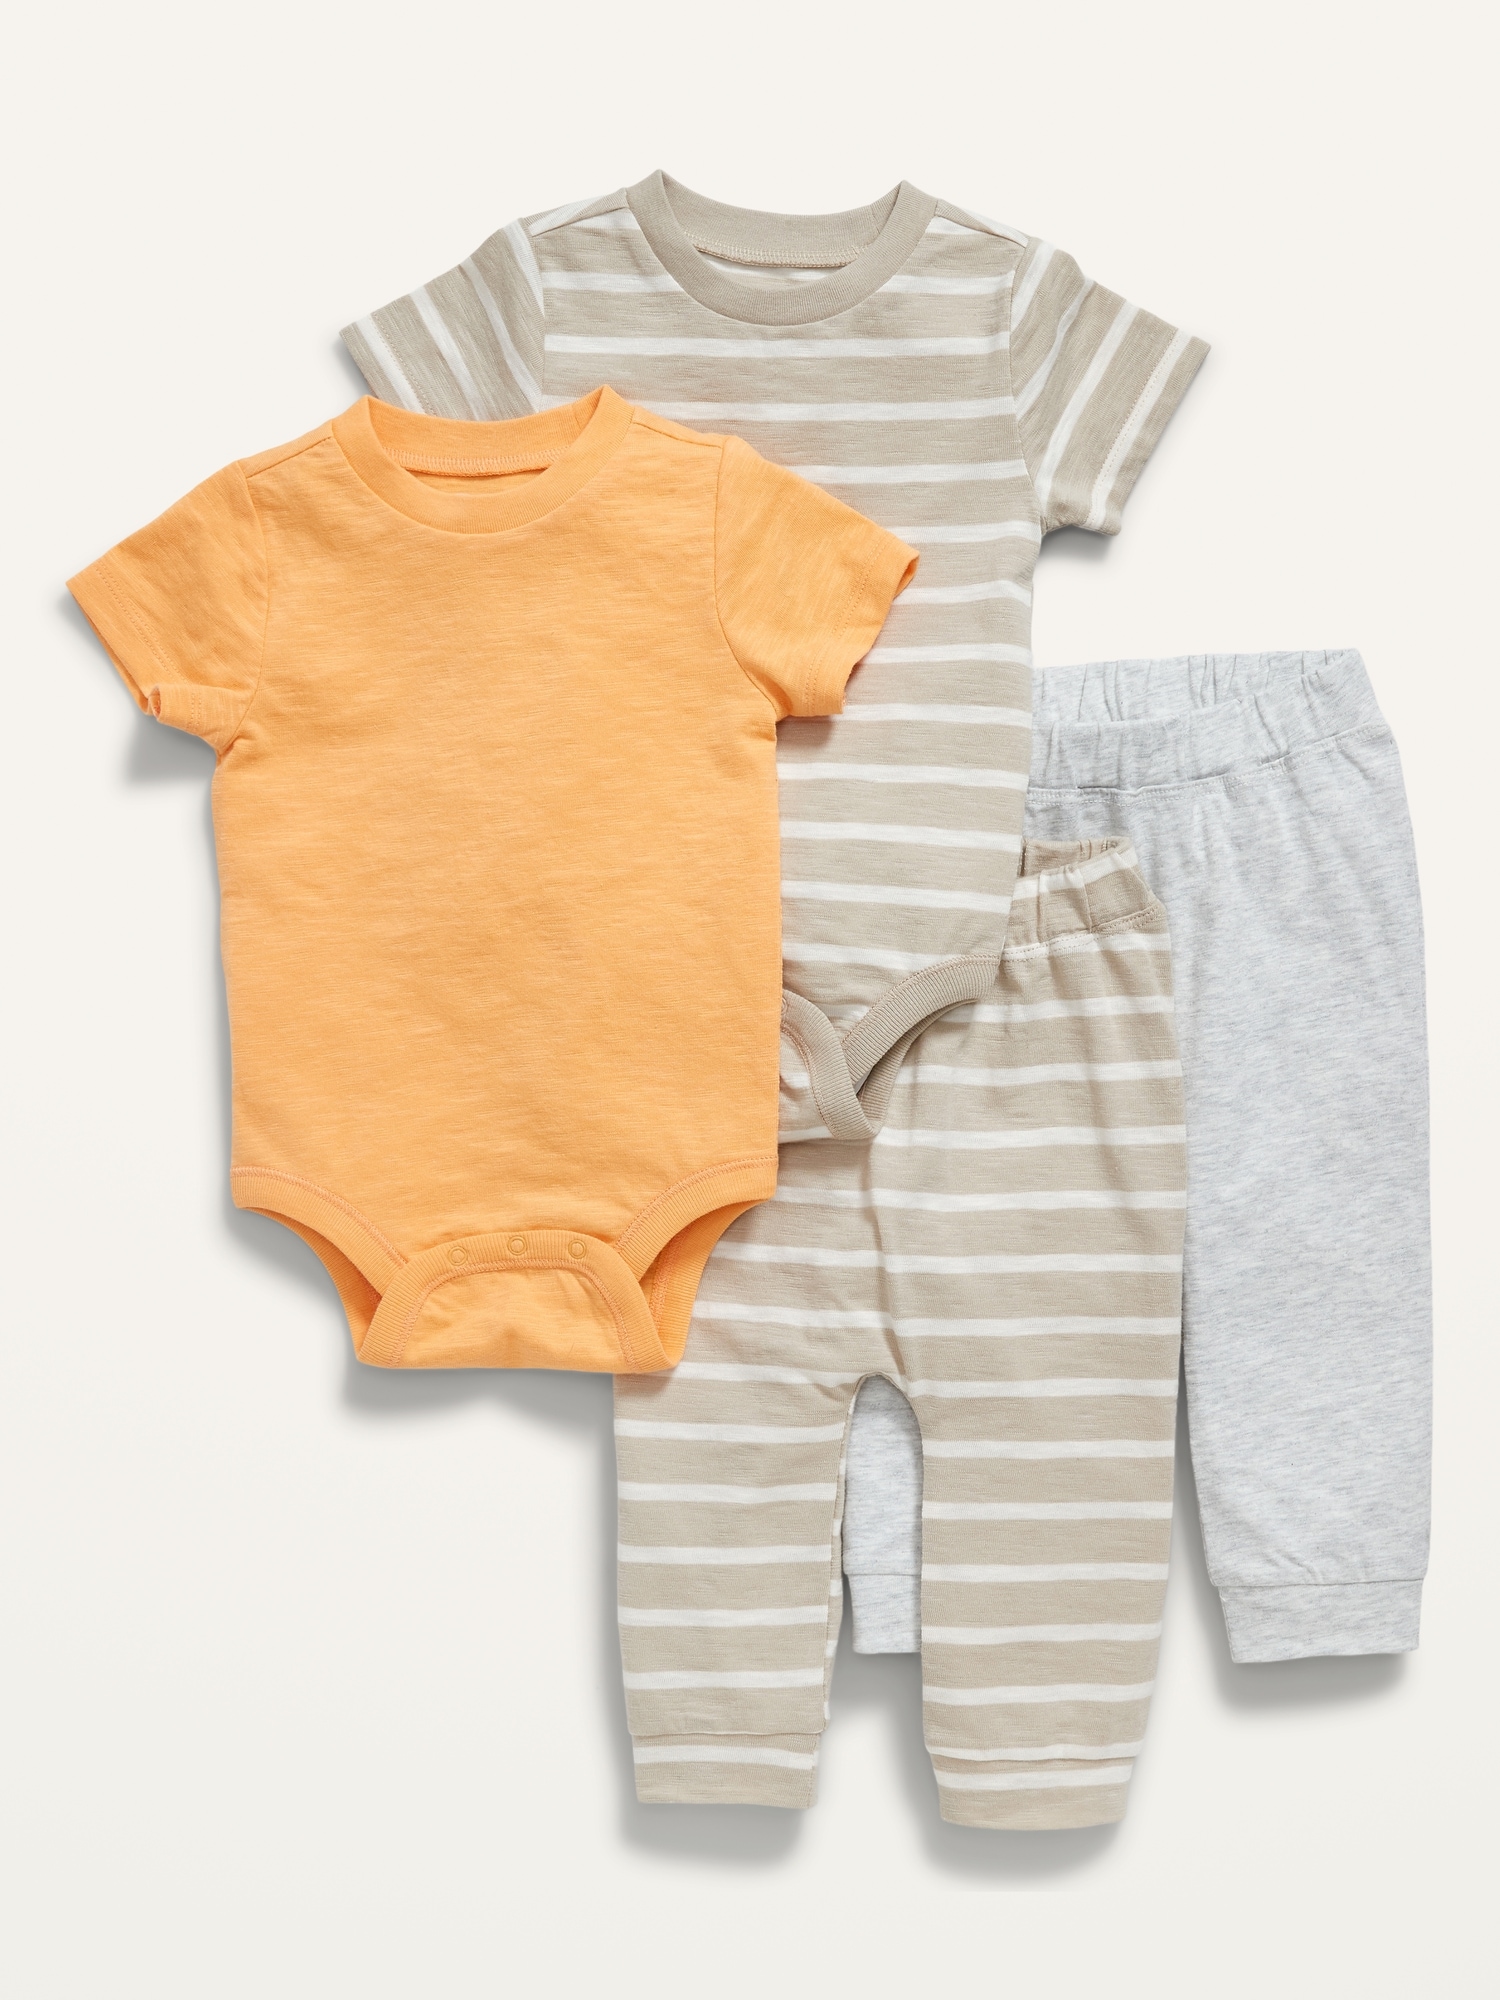 Unisex 4-Piece Bodysuit and Pants Set for Baby | Old Navy